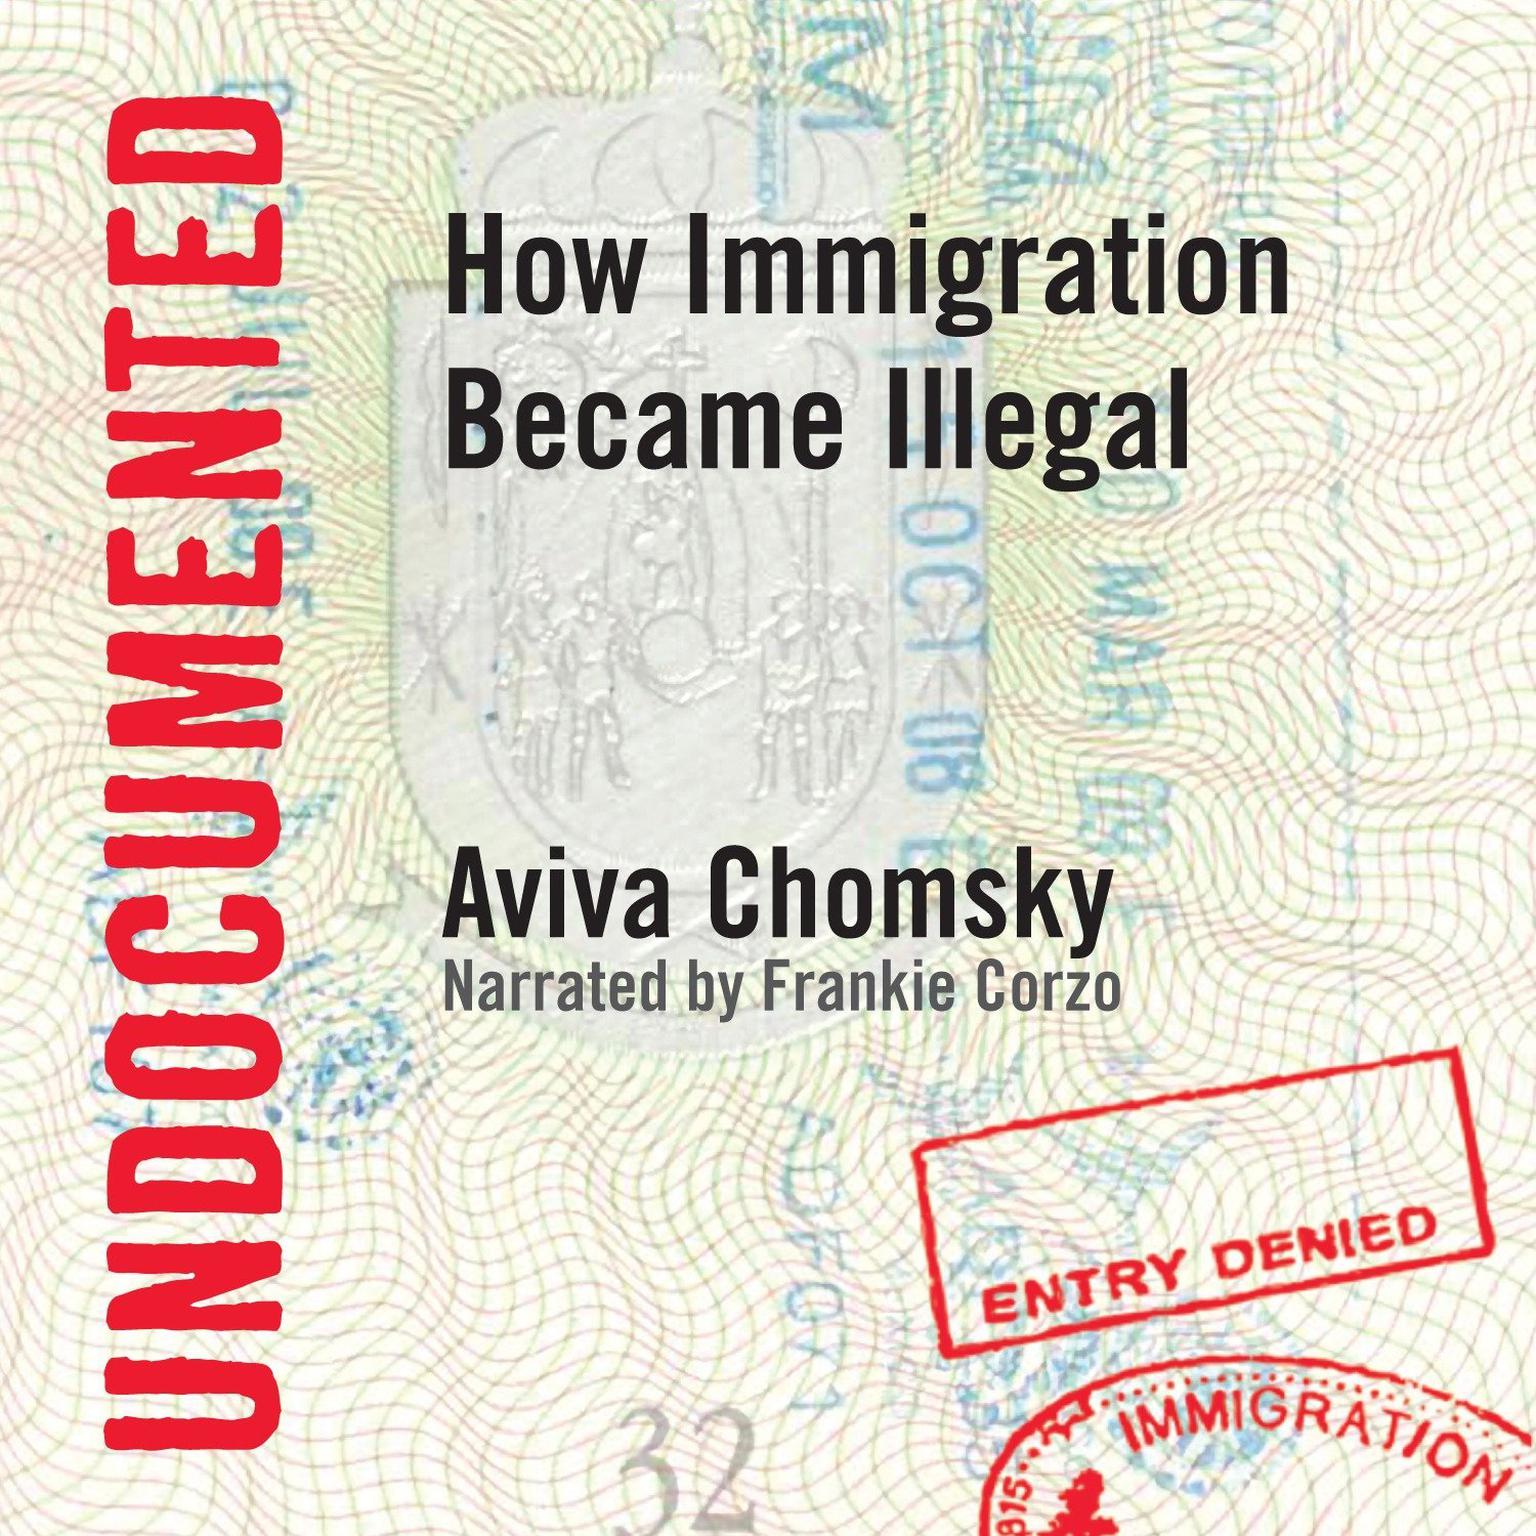 Undocumented: How Immigration Became Illegal Audiobook, by Aviva Chomsky